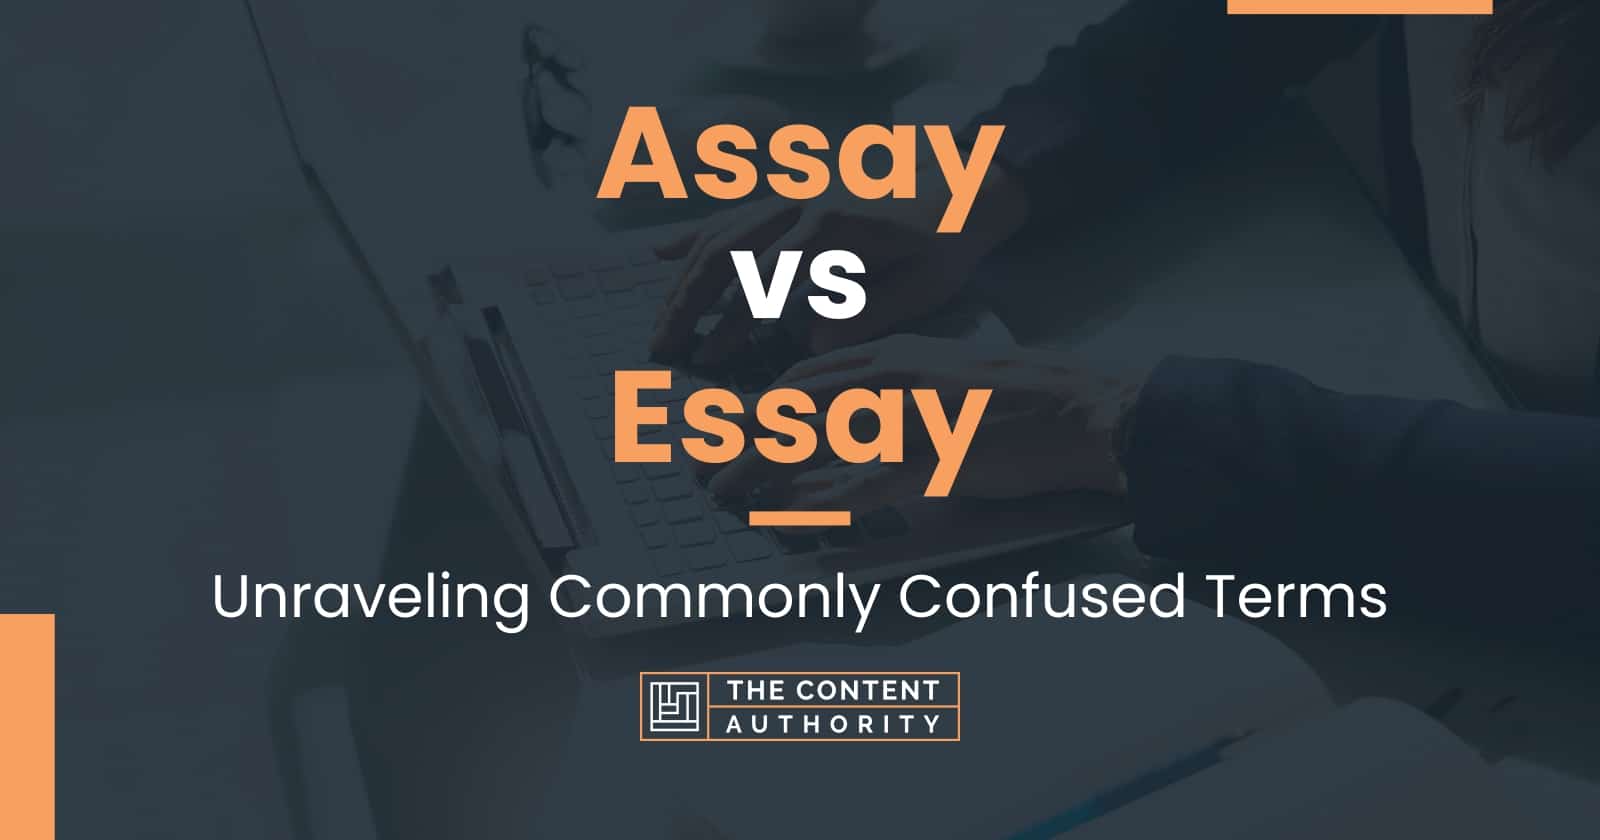 what is difference between essay and assay